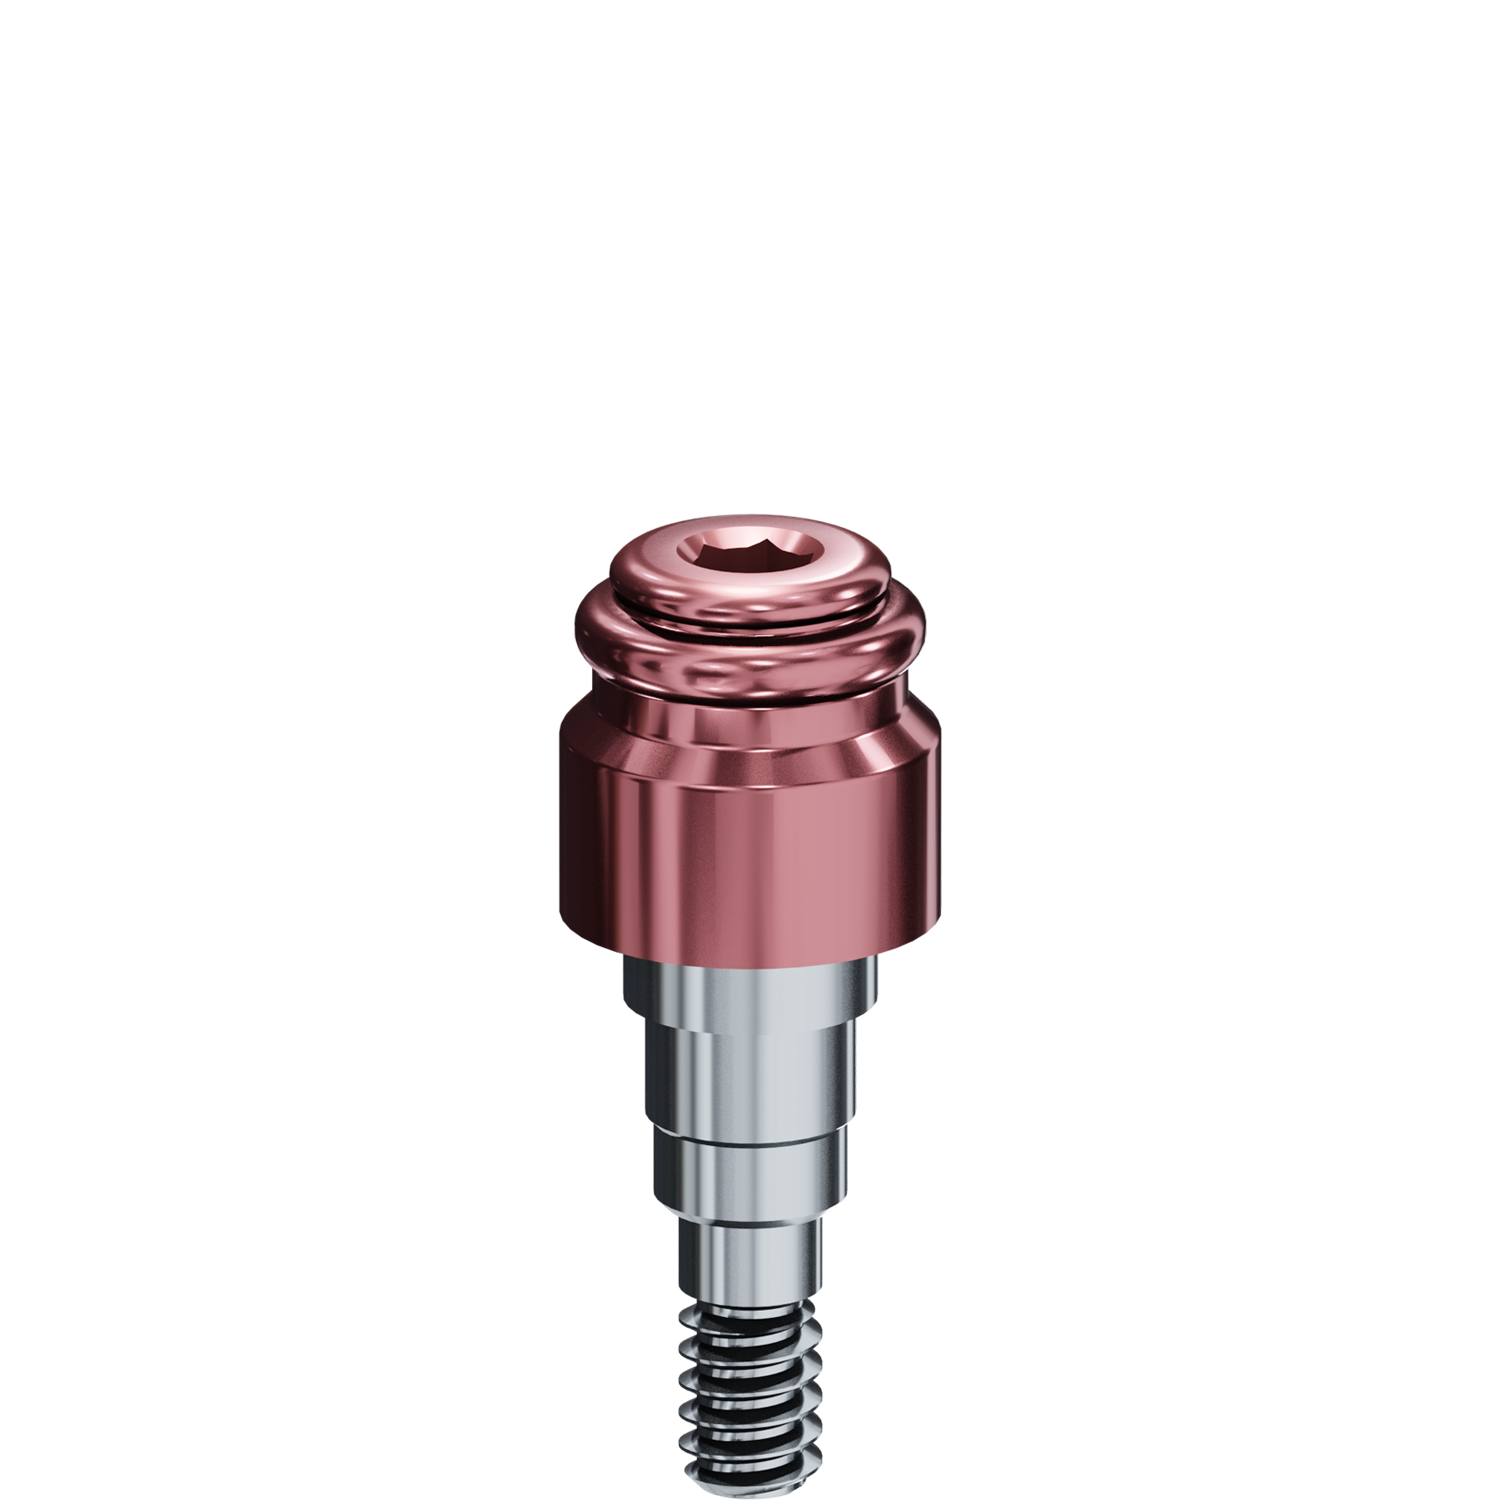 R-Tx Attachment System - Biomet 3i® - 4.1mm Certain Connection - 0.048" Drive - 2.0mm